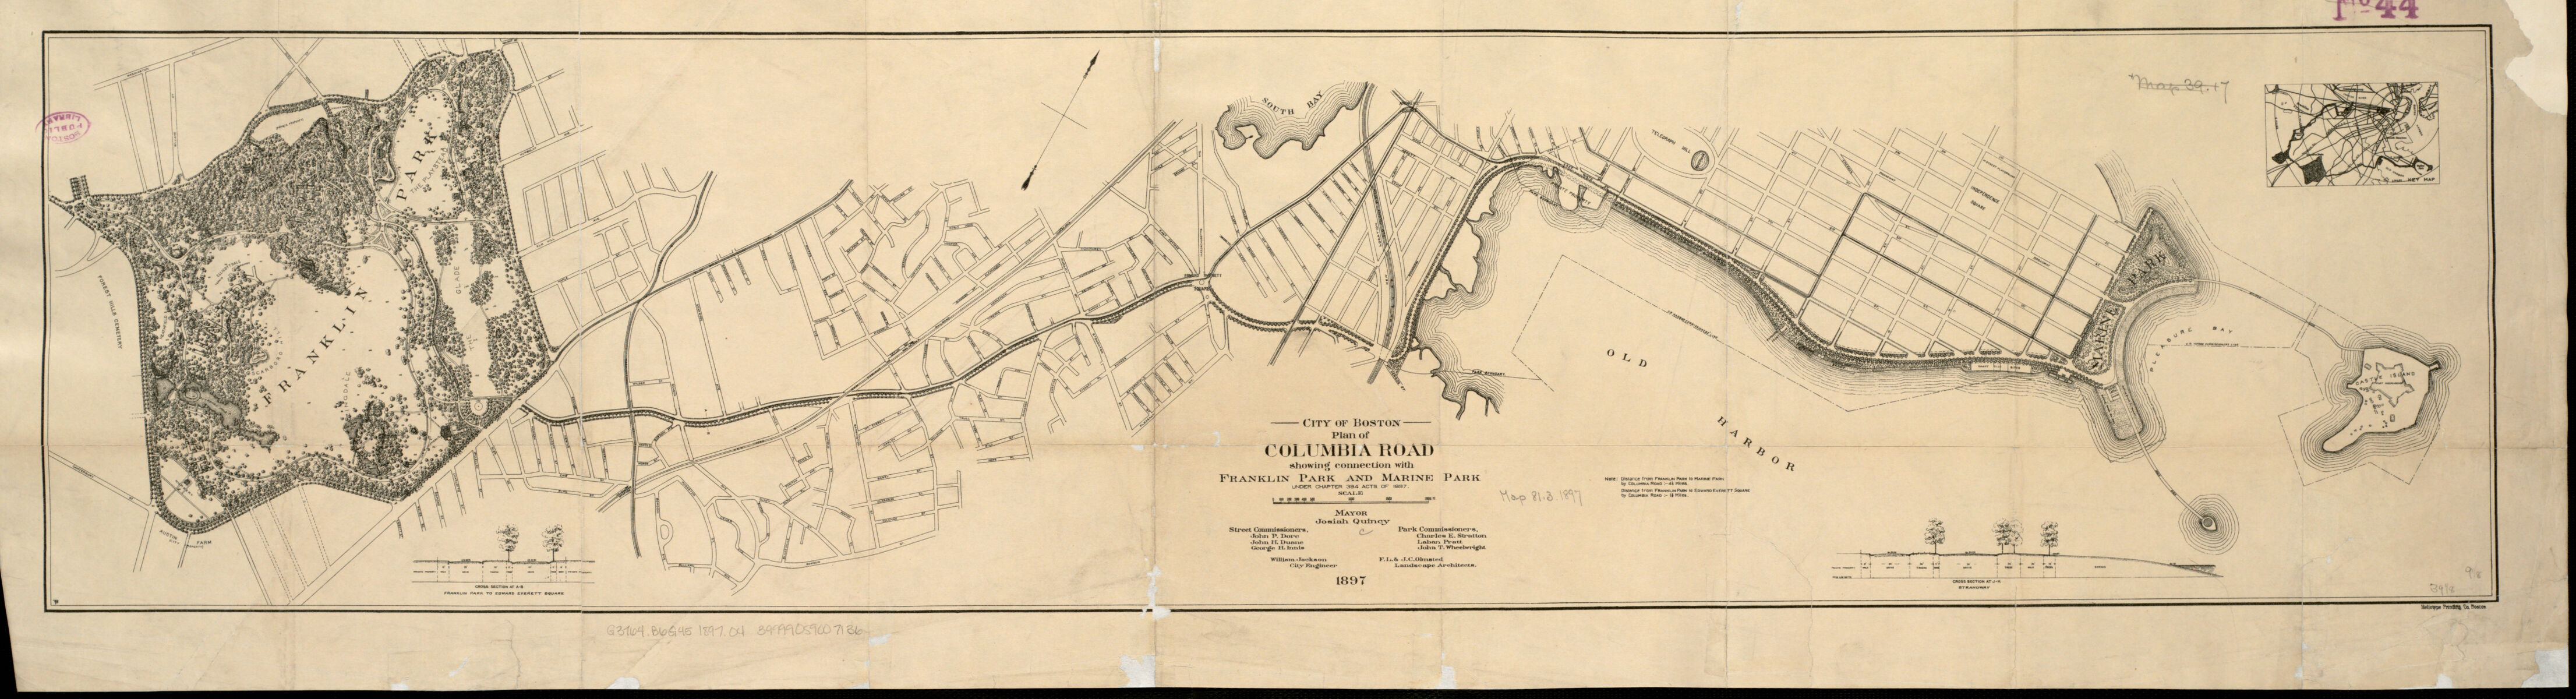 City of Boston Plan of Columbia Road, Showing Connection with Franklin Park and Marine Park drawn by Frederick Law Olmsted & John Charles Olmsted;